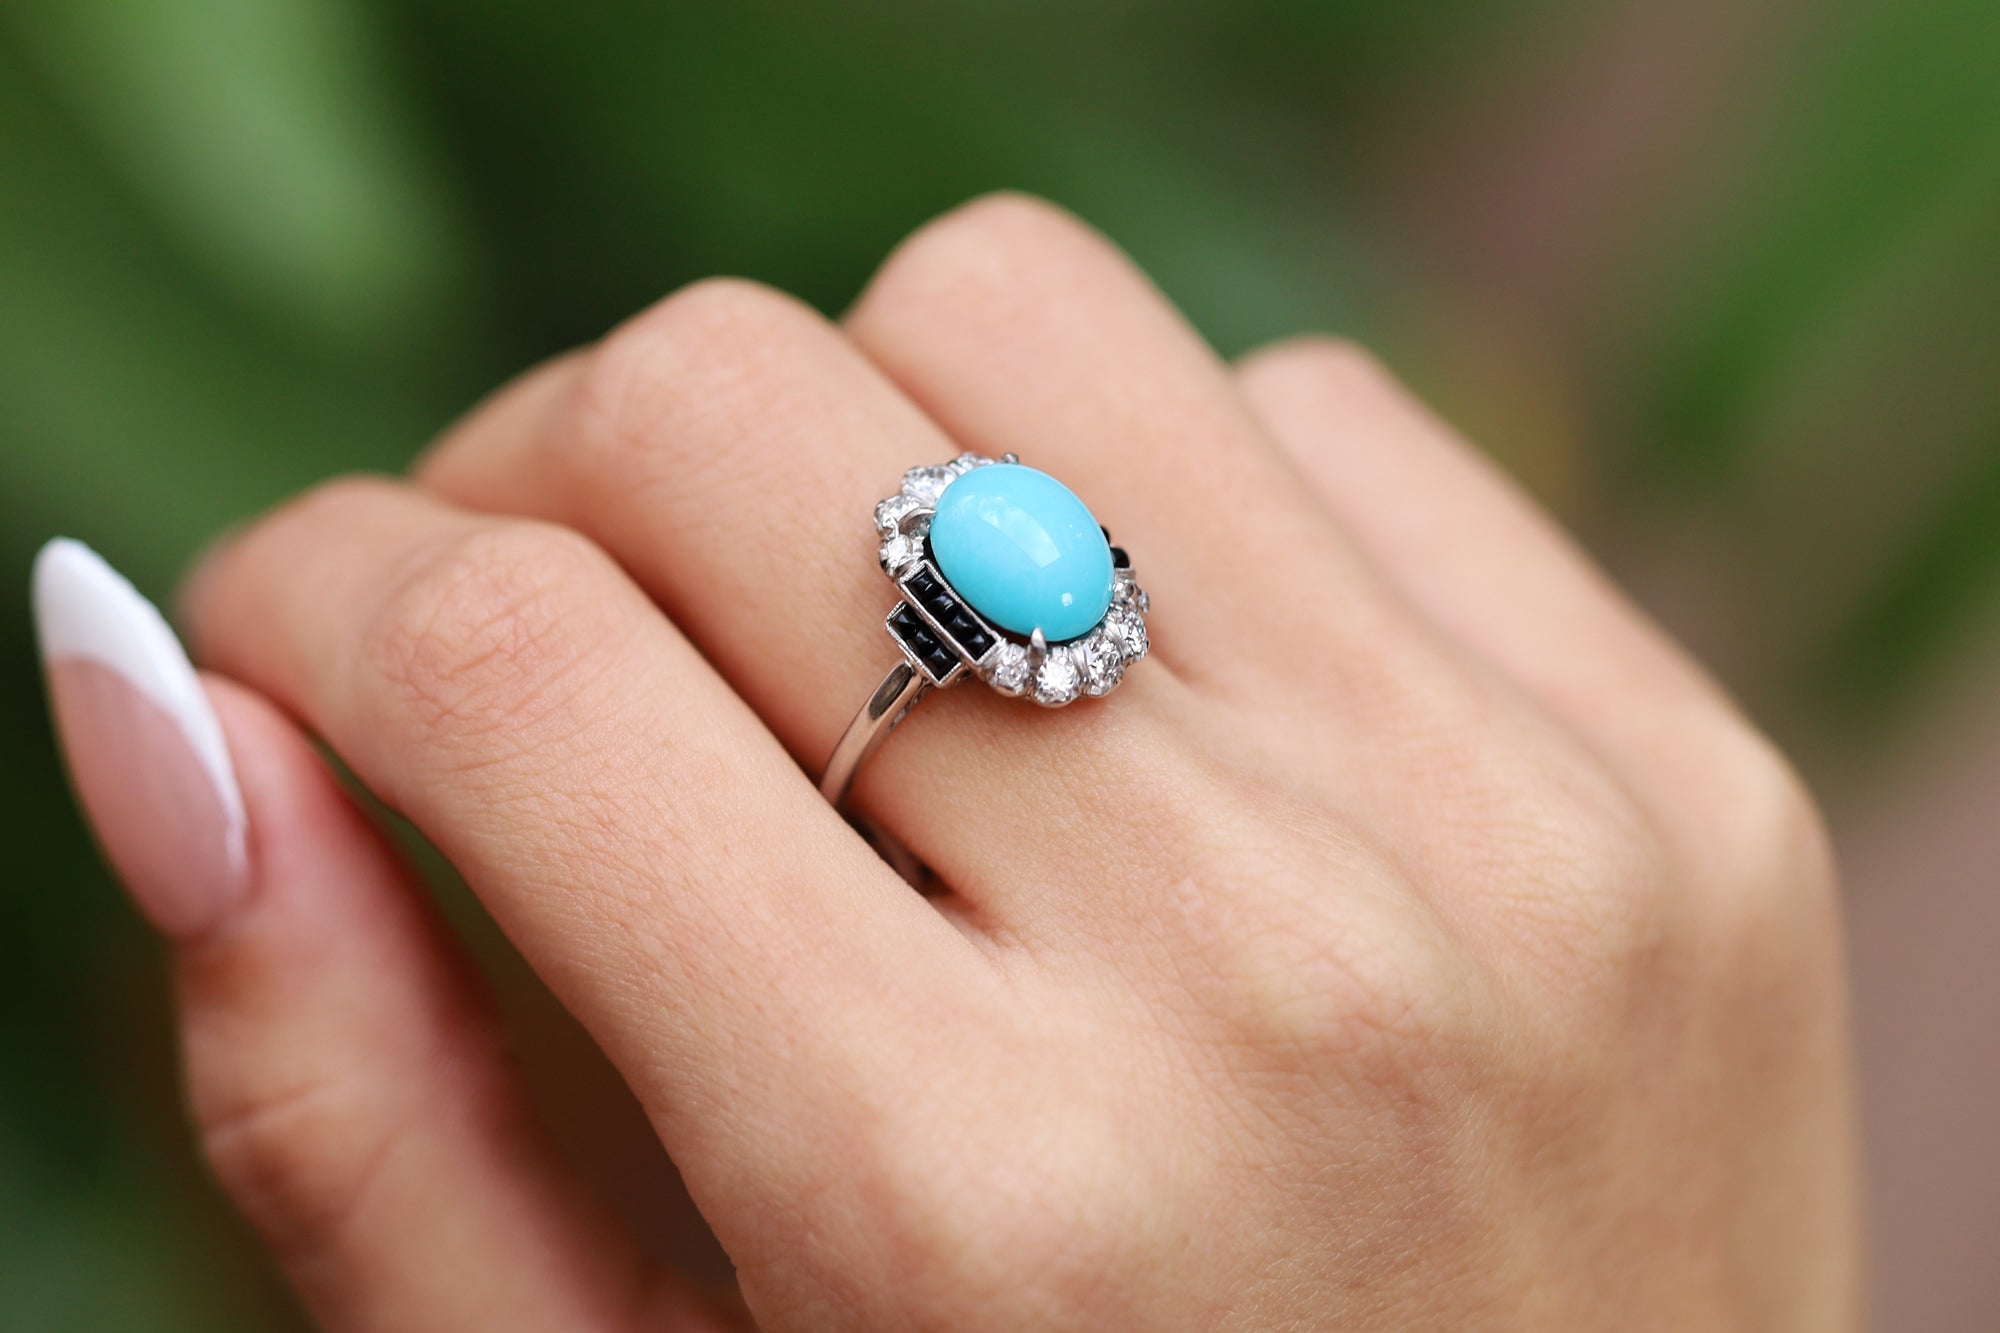 Art Deco Inspired Turquoise, Onyx and Diamond Cocktail Ring